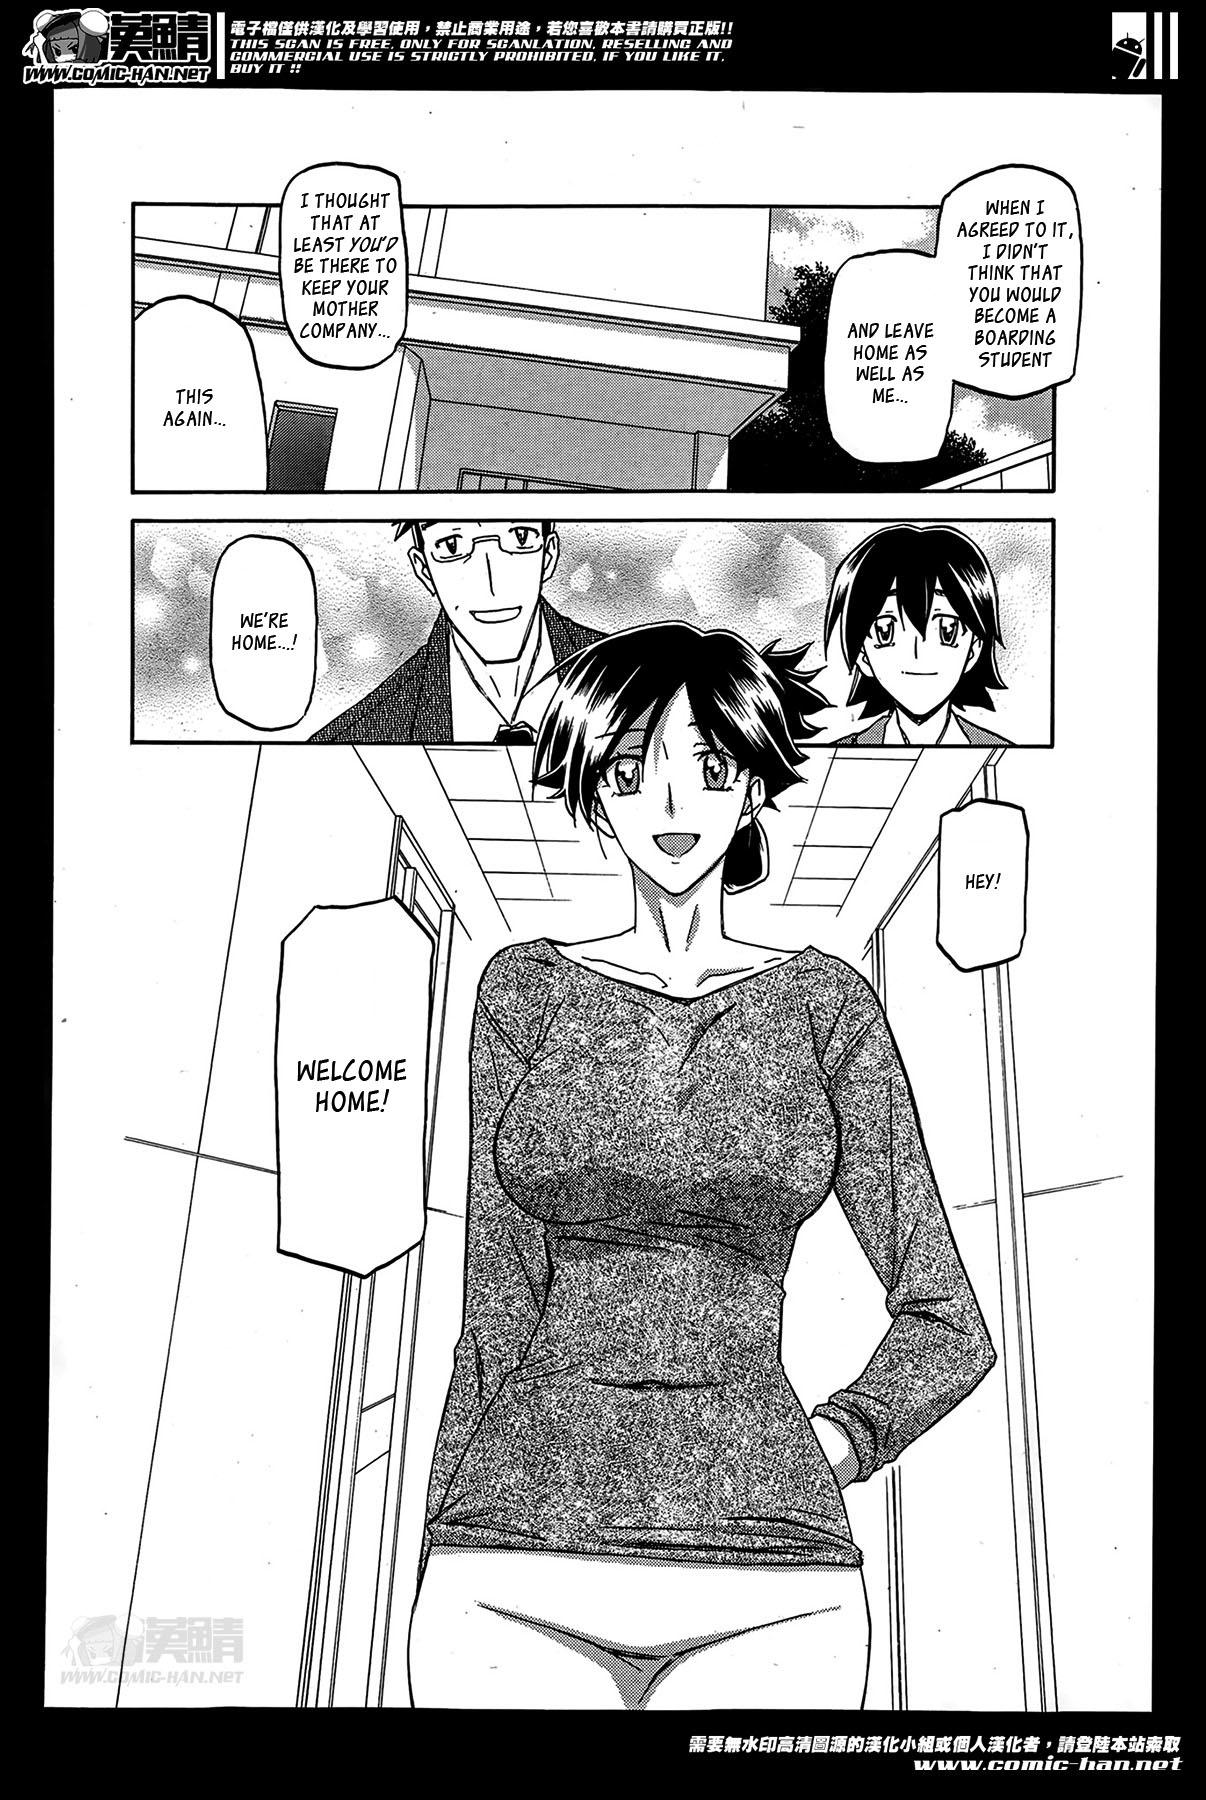 Family Porn Gekkakou no Ori | The Tuberose's Cage Ch. 1-23 Misc translators and scans Passion - Page 2